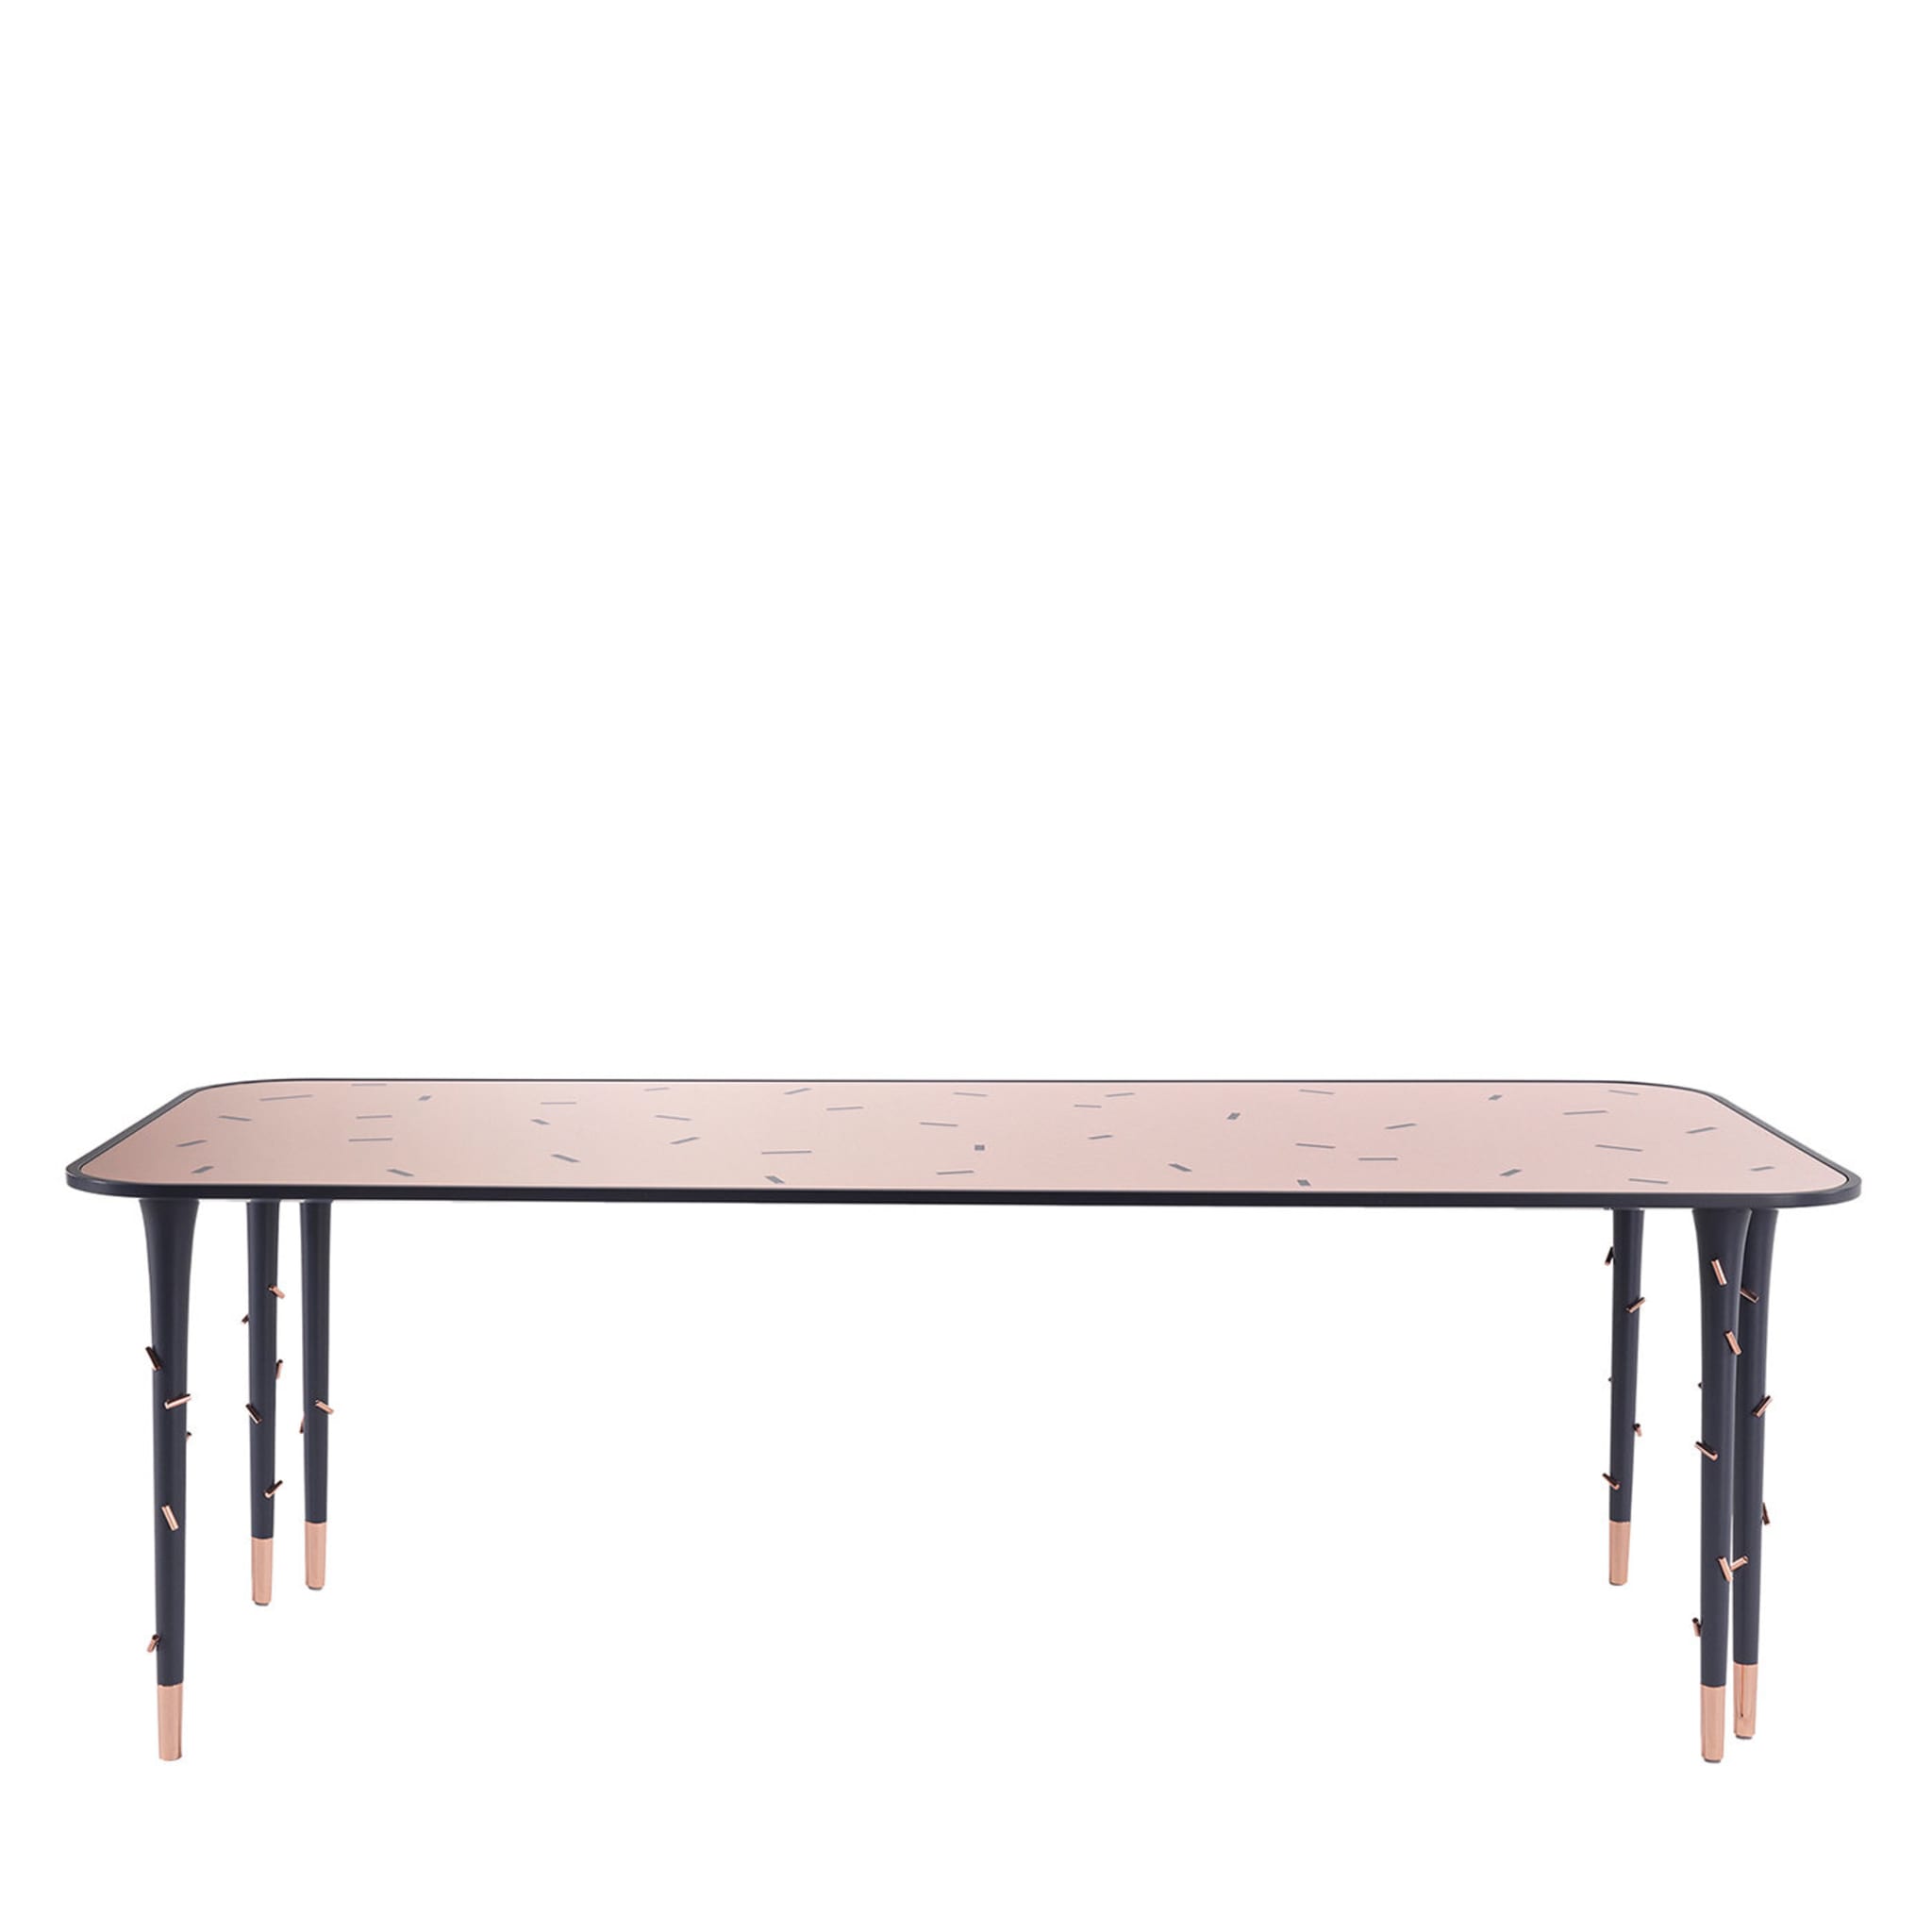 Mettic Dining Table by Matteo Cibic - Main view